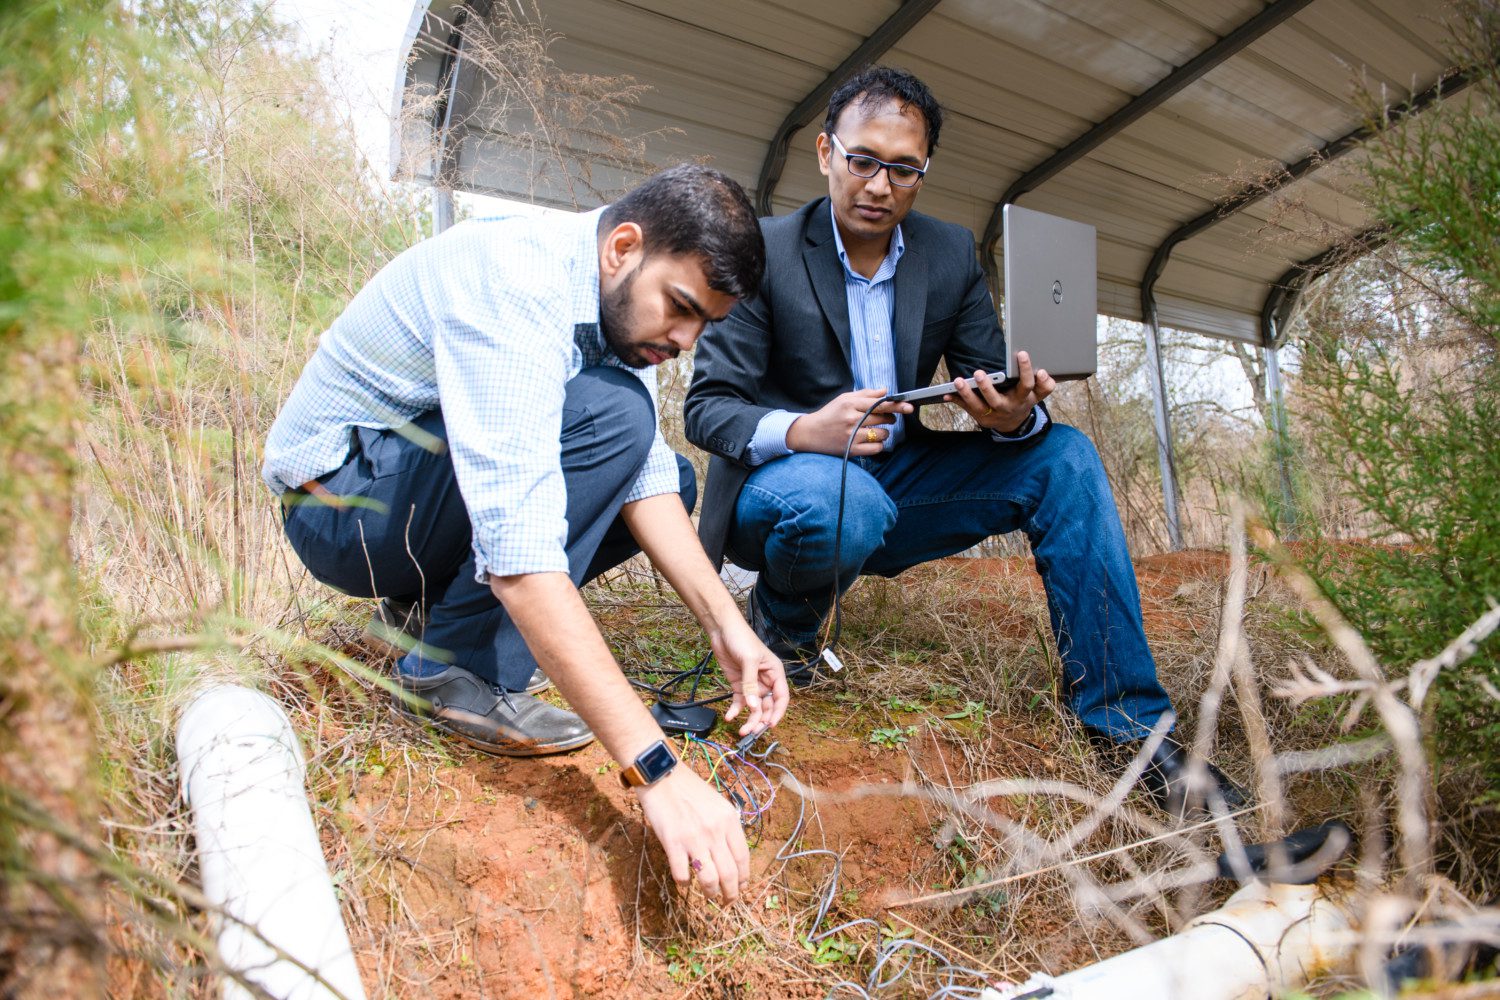 Kalyan Piratla (right) and Ph.D. student Harshit Shukla demonstrate their research at a facility off Hugo Drive about a mile from Clemson University's main campus.